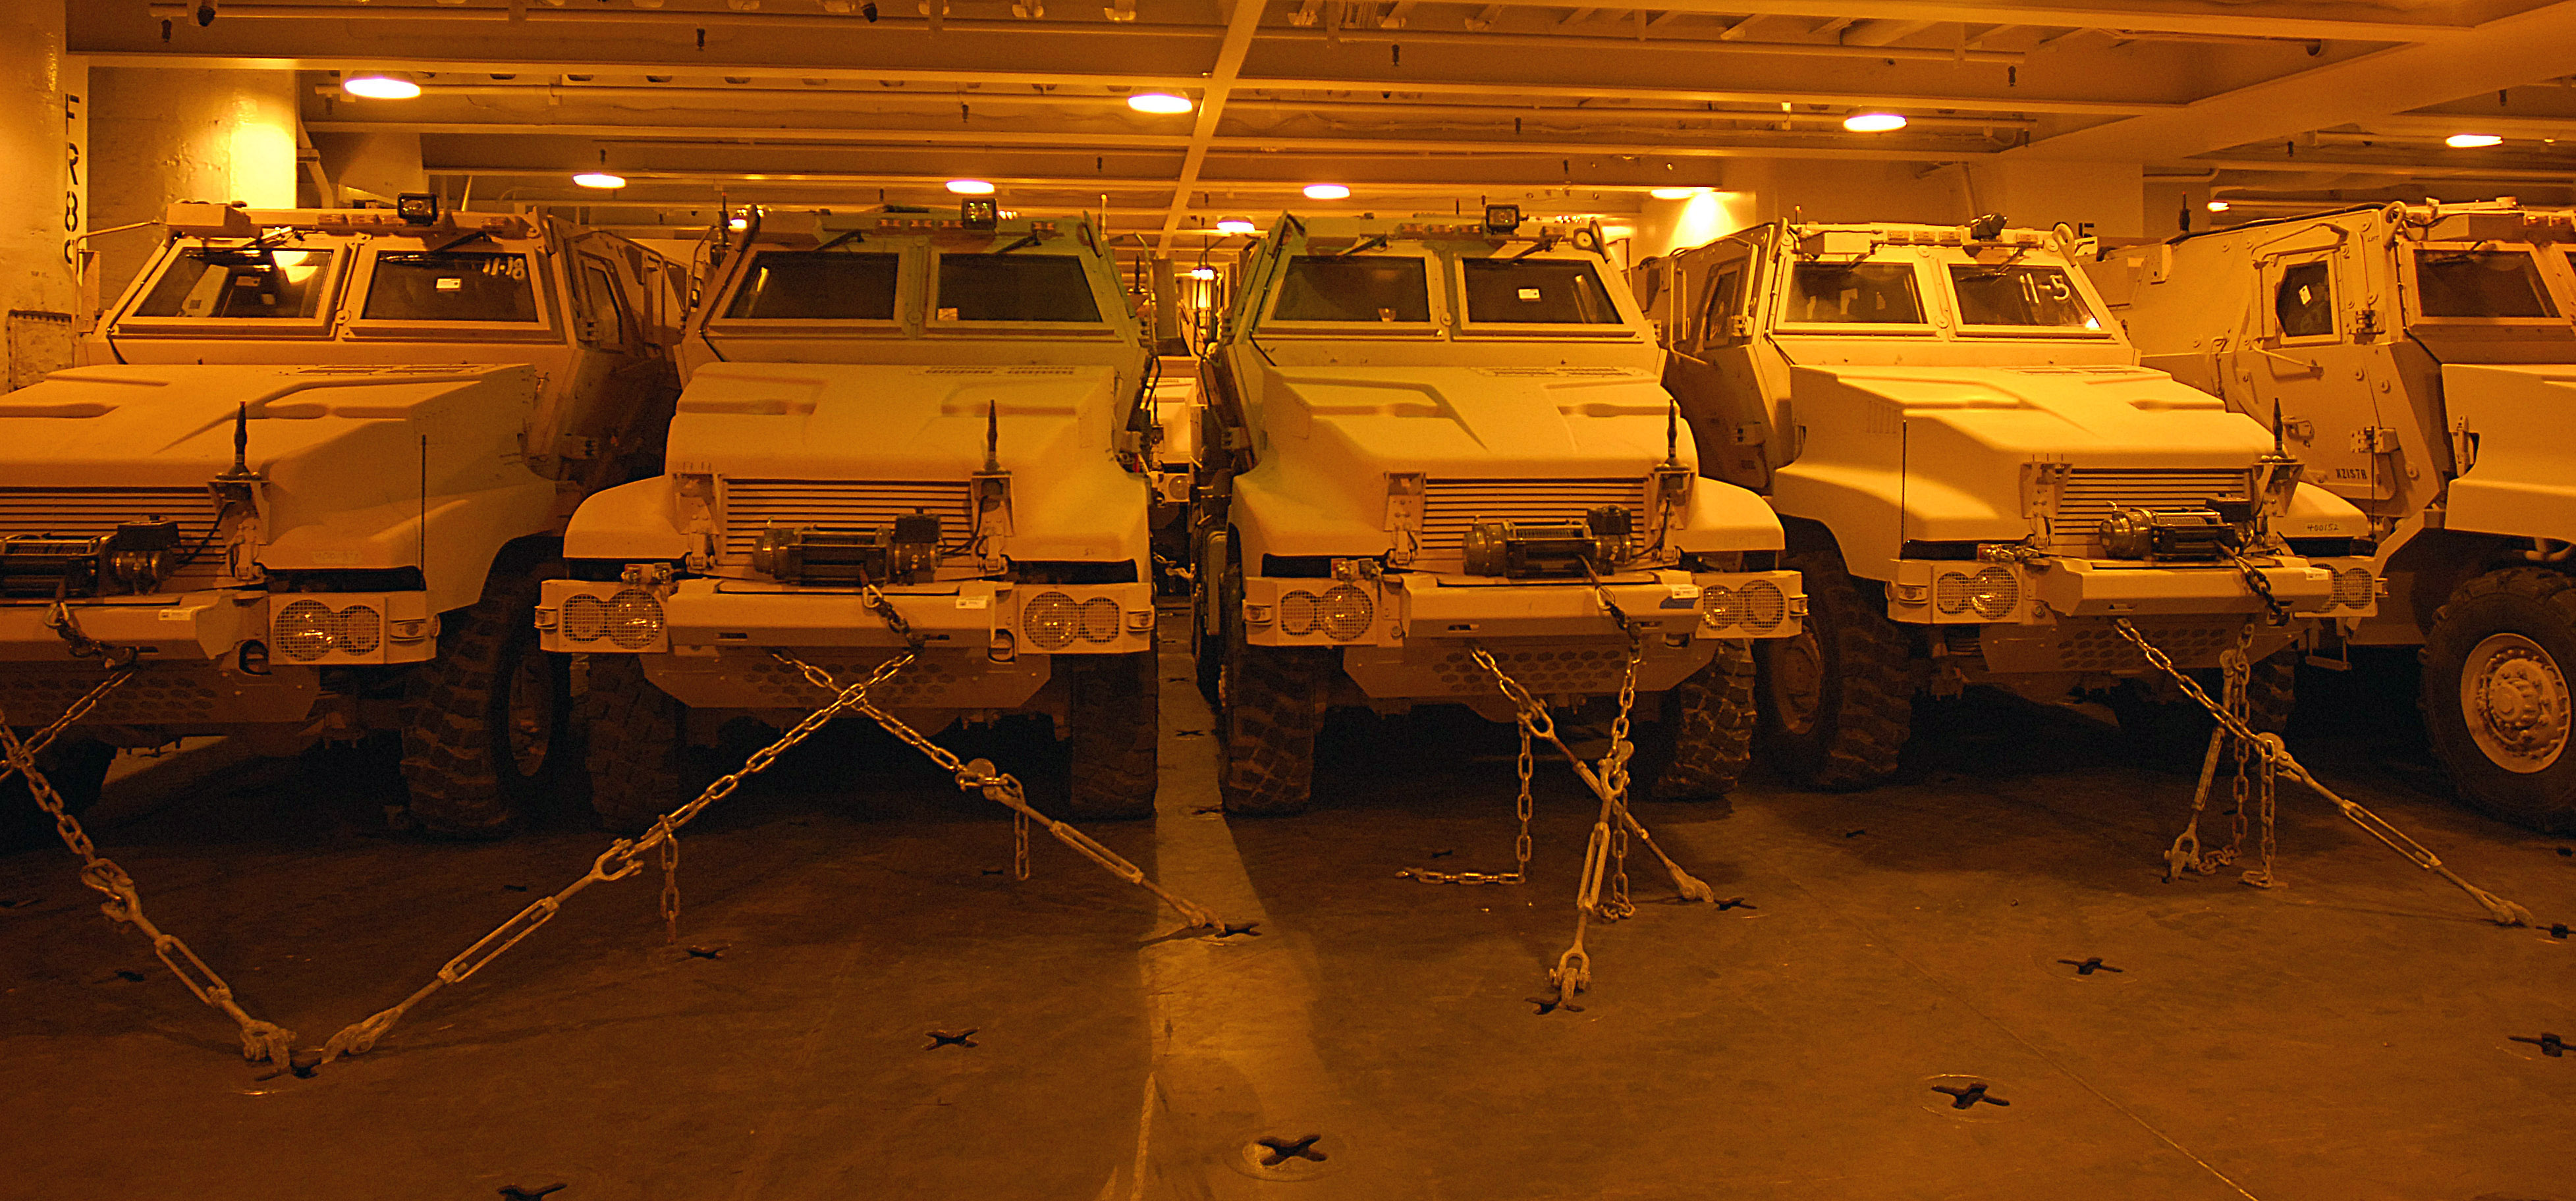 Mine resistant ambush protected vehicles (MRAP) are offloaded from the Military Sealift Command roll-on/roll-off ship USNS Pililaau (T-AKR 304) onto the pier in 2008. US Navy Photo